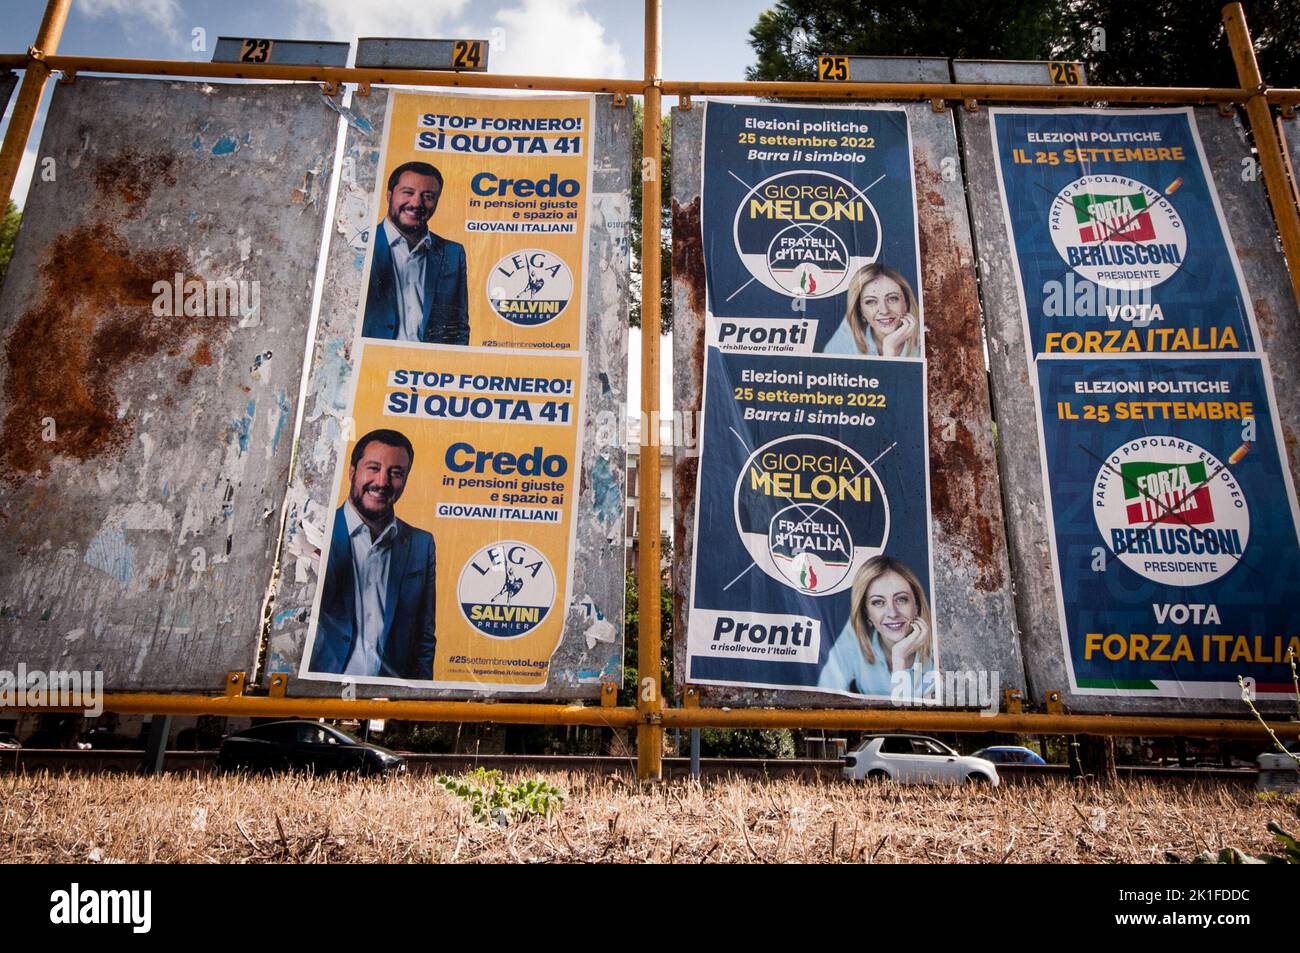 ROME, ITALY - SEPTEMBER 17, 2022 ROME, ITALY - SEPTEMBER 17, 2022  The electoral poster of Matteo Salvini, leader of the Lega party, and the electoral poster of Giorgia Meloni, leader of the Fratelli d'Italia party leaders ,and poster  Forza Italia political party ahead of the upcoming September 25 general elections for the renewal of the Chamber of Deputies and the Senate of the Republic on September 17, 2022 in Rome. On September 25, 2022, voters will elect all members of the two chambers of the Italian parliament. After a constitutional referendum, the size of the chambers will be halved, t Stock Photo